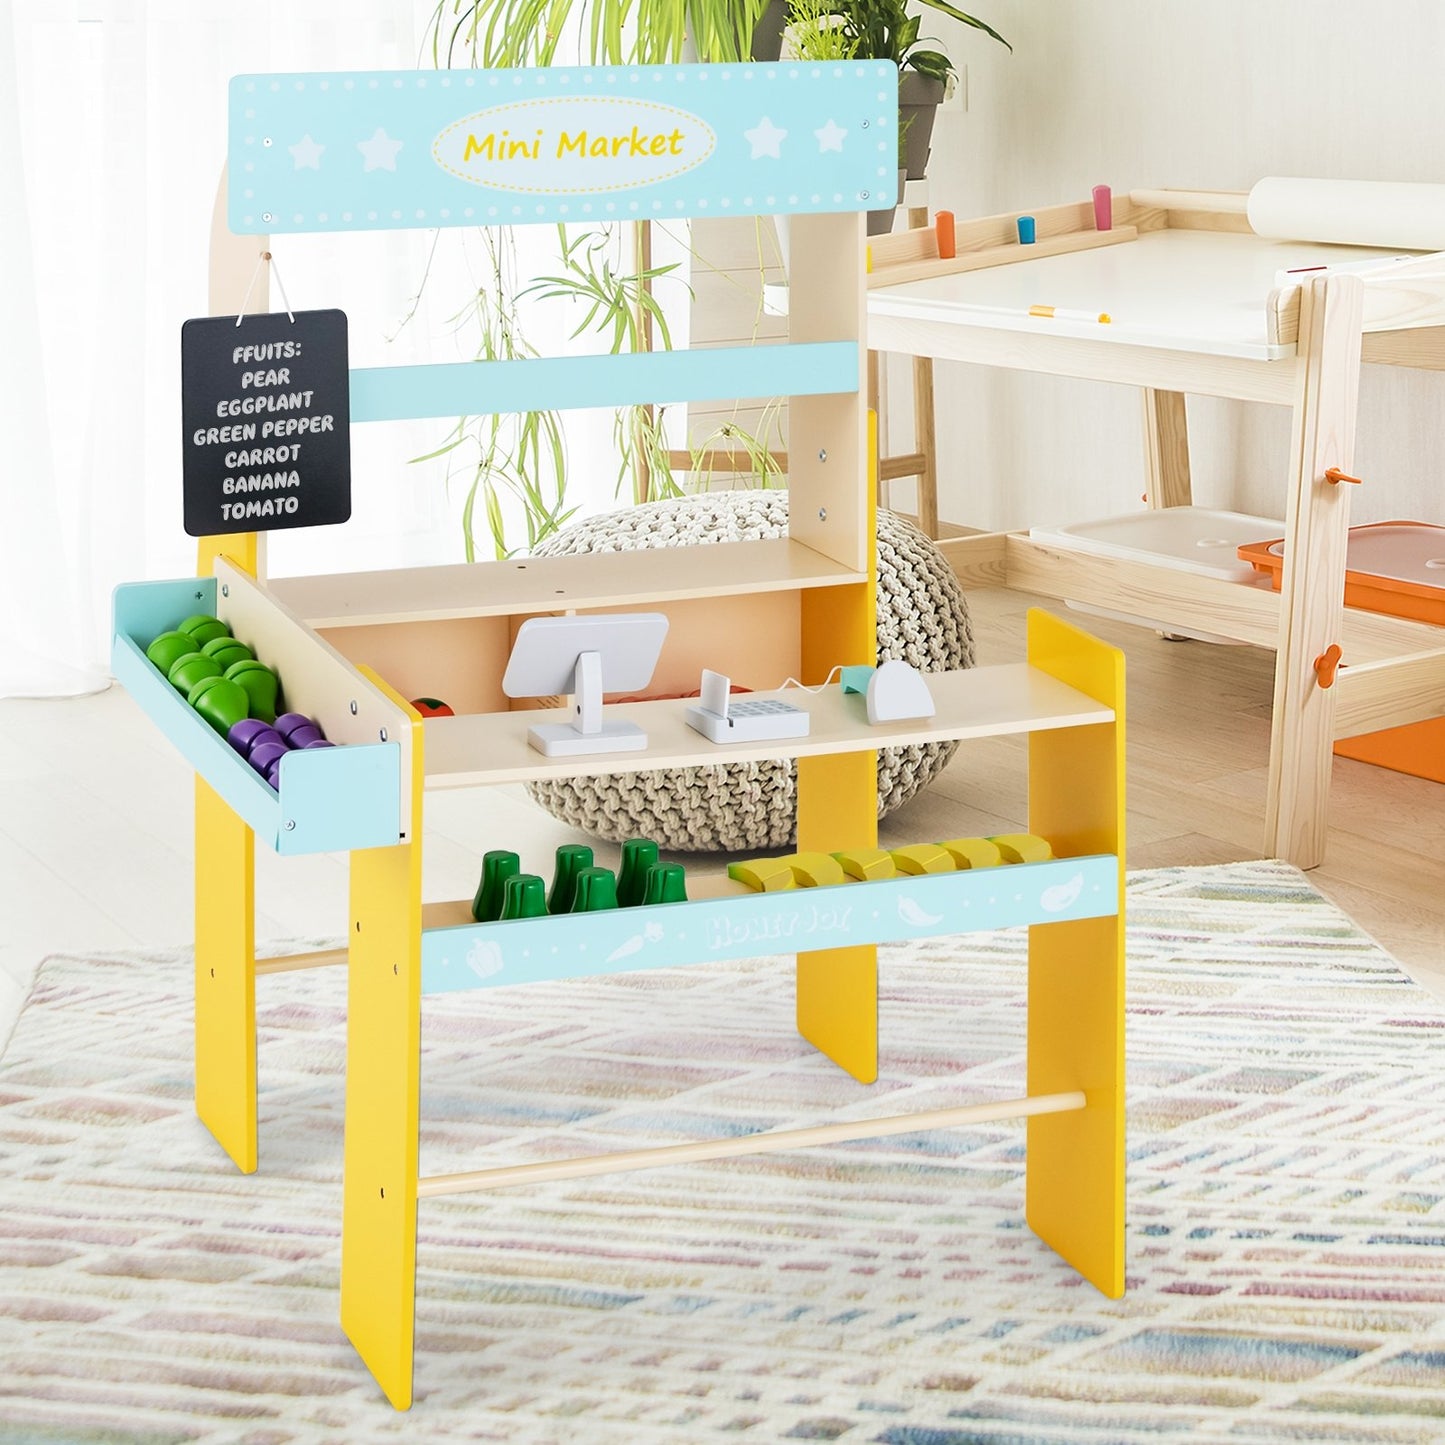 Kid's Pretend Play Grocery Store with Cash Register and Blackboard, Blue - Gallery Canada